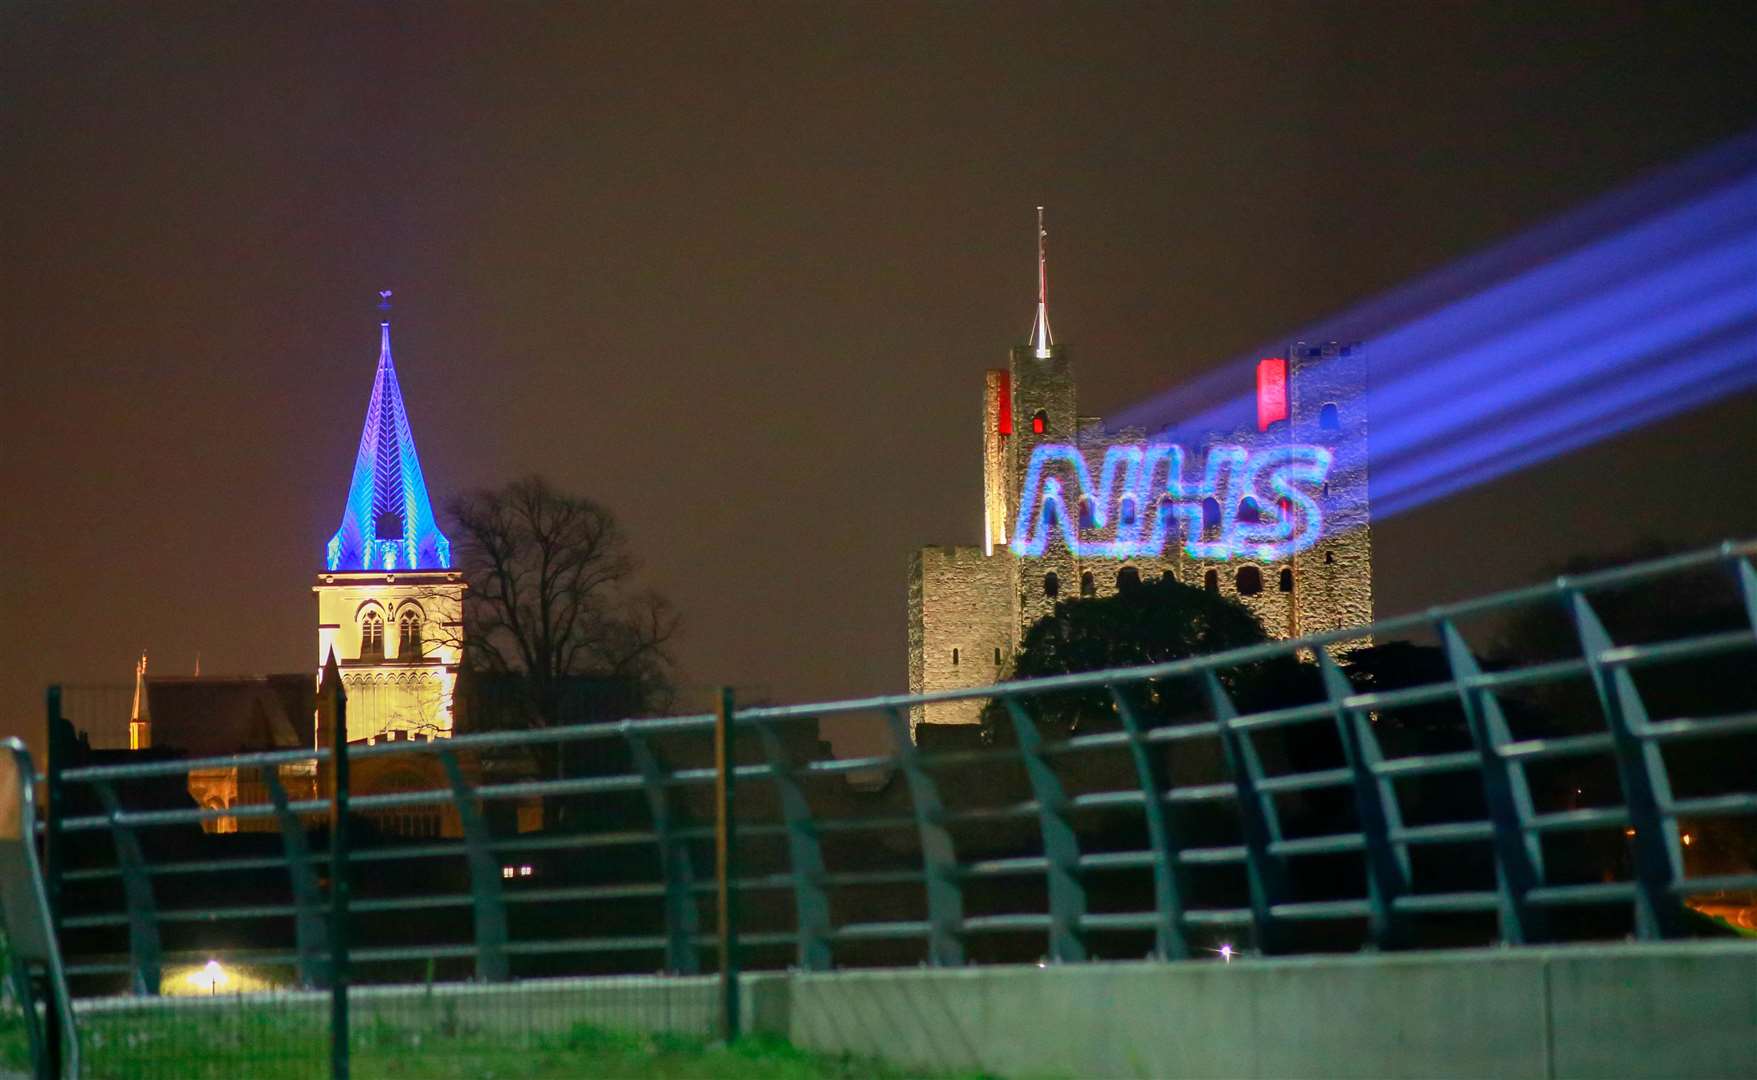 The NHS logo beamed onto the side of Rochester Castle